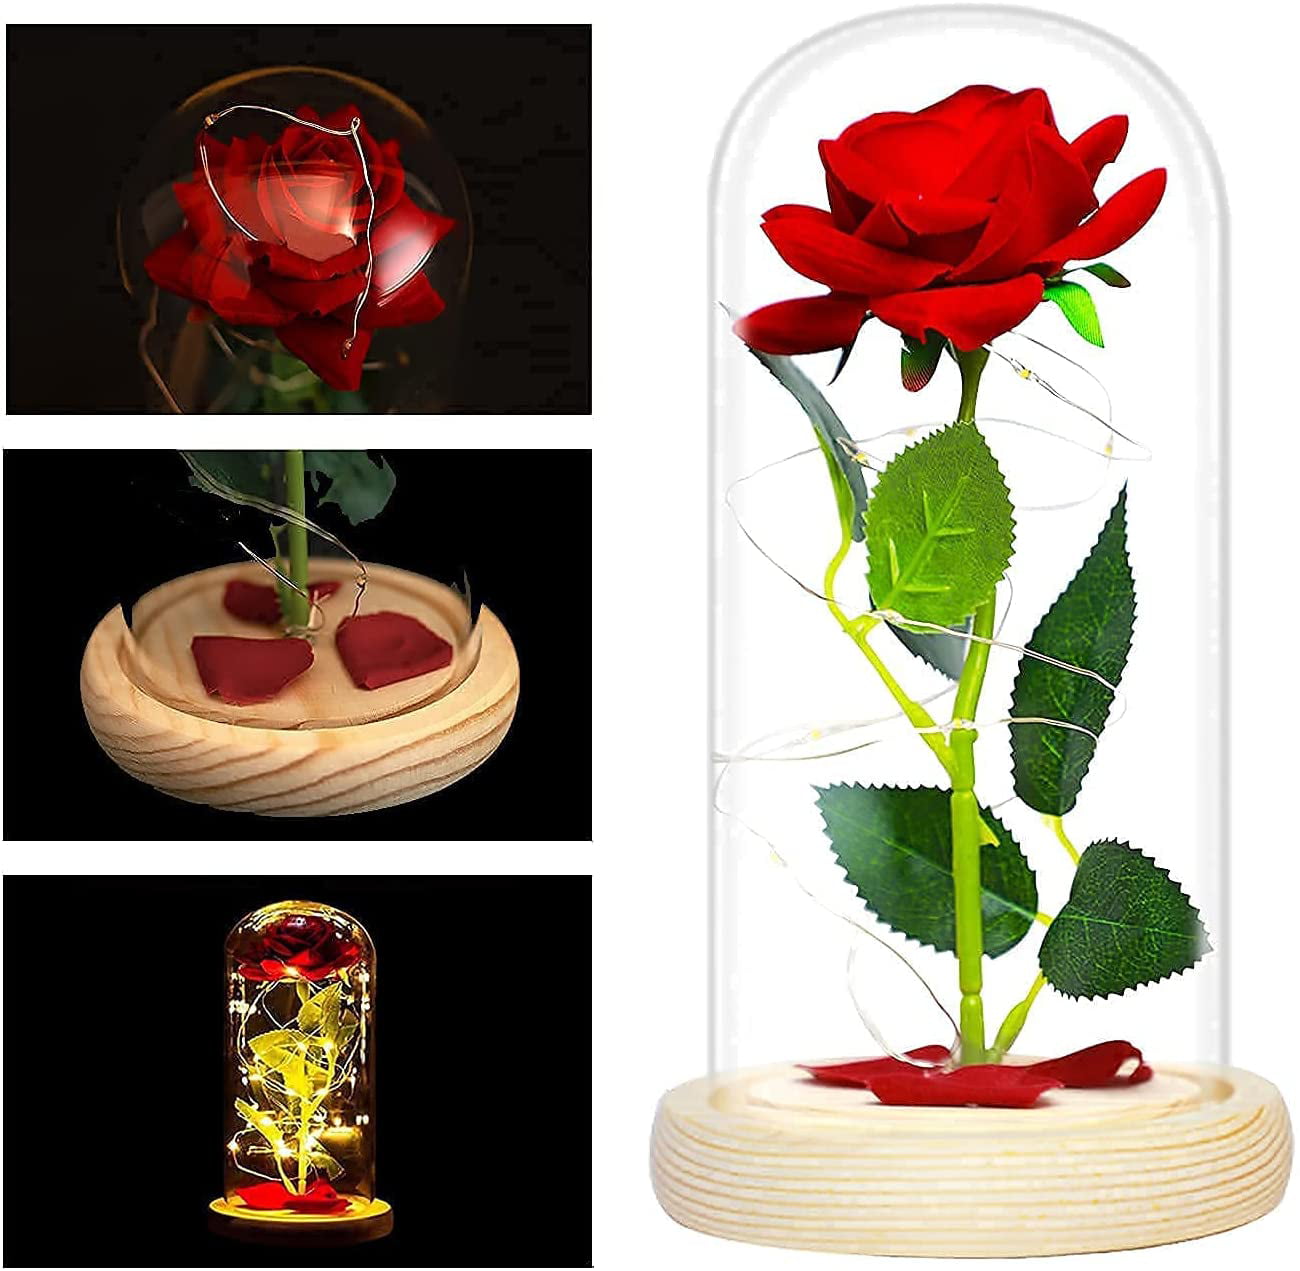 Gifts for Her,Preserved Red Rose Gift Set,Anniversary Romantic Birthday Gifts for Her,Flowers Gifts for Mum Women Wife Girlfriend Sister Her on Mother's Day,Valentine's Day,Christmas